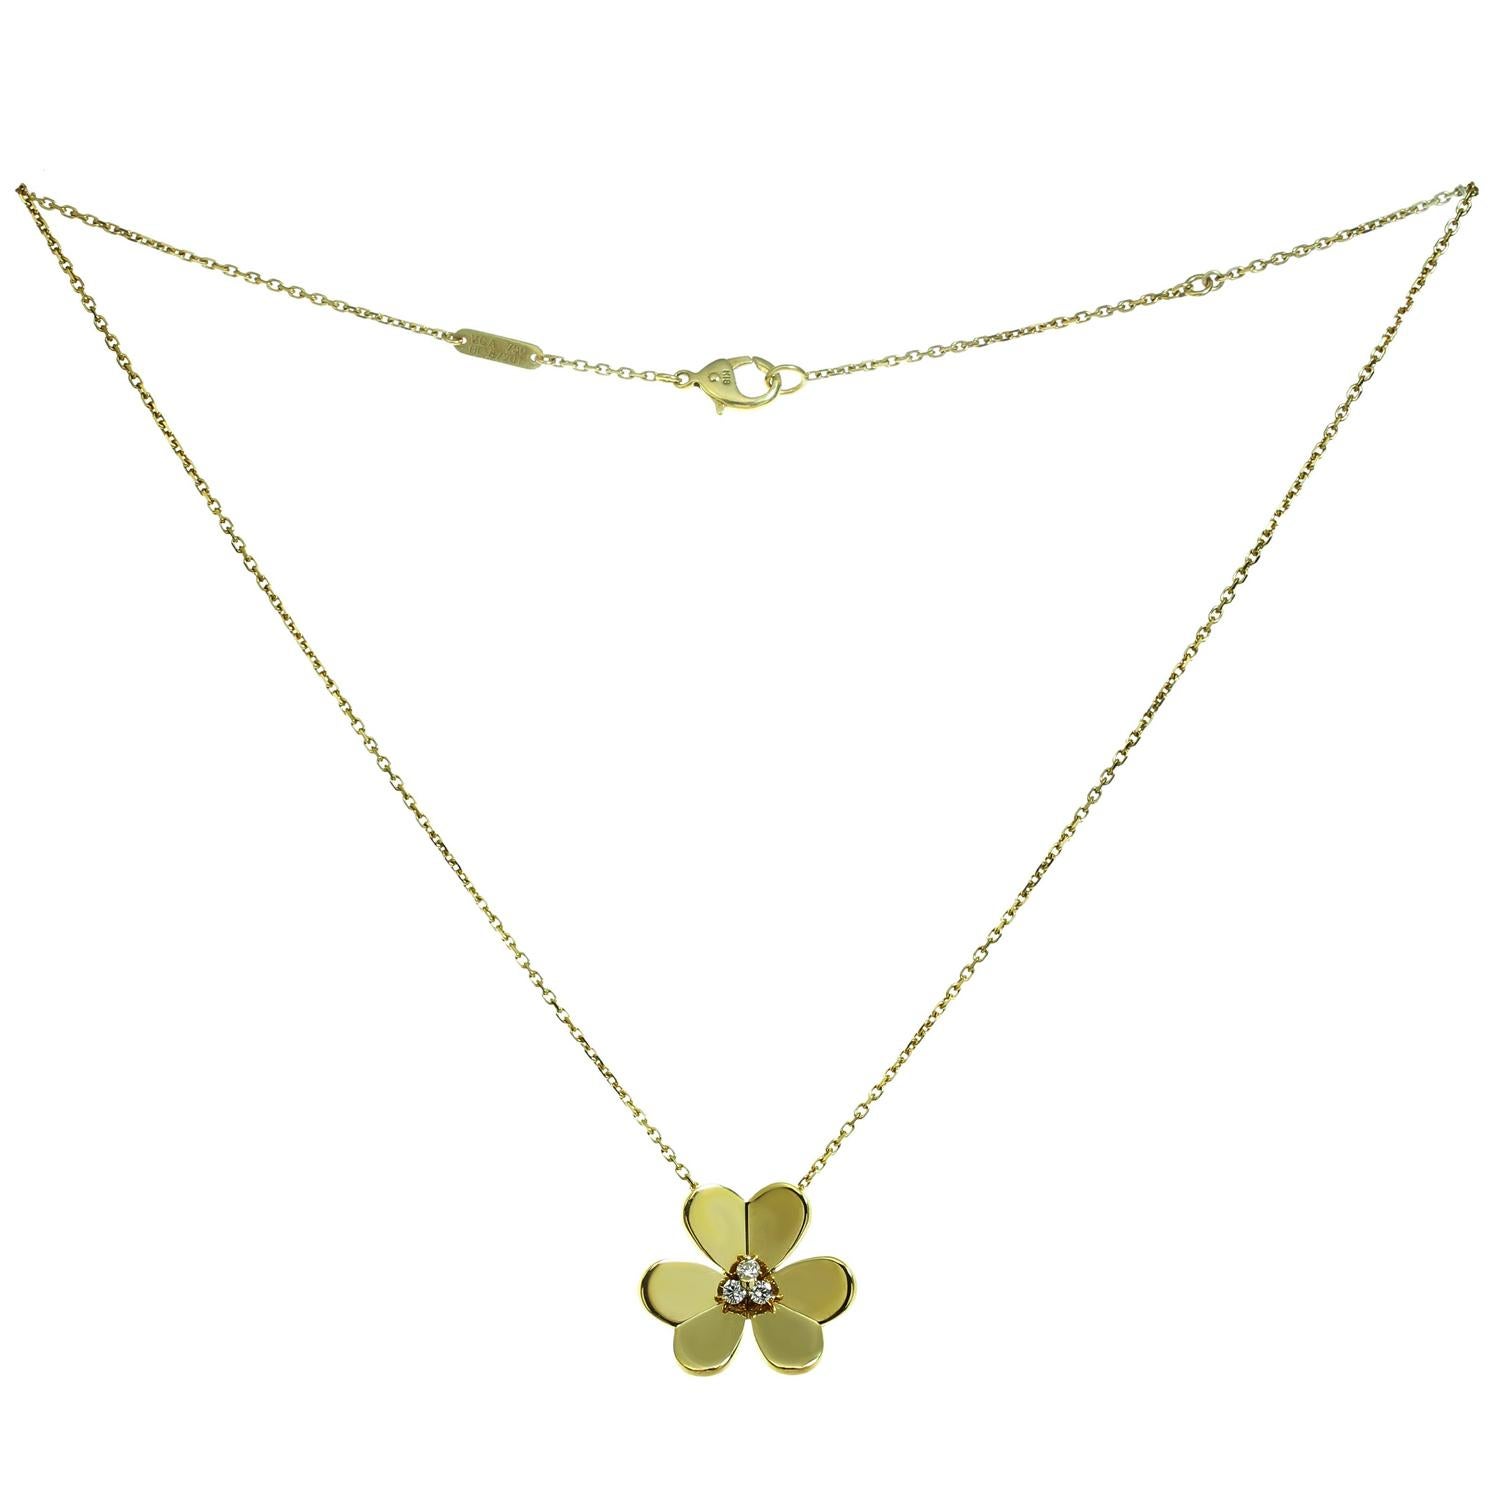 This elegant Van Cleef and Arpels necklace from the iconic Frivole collection is crafted in 18k yellow gold and features a flower pendant set with 3 round brilliant D-E-F VVS1-VVS2 diamonds weighing an estimated 0.16 carats. Made in France circa